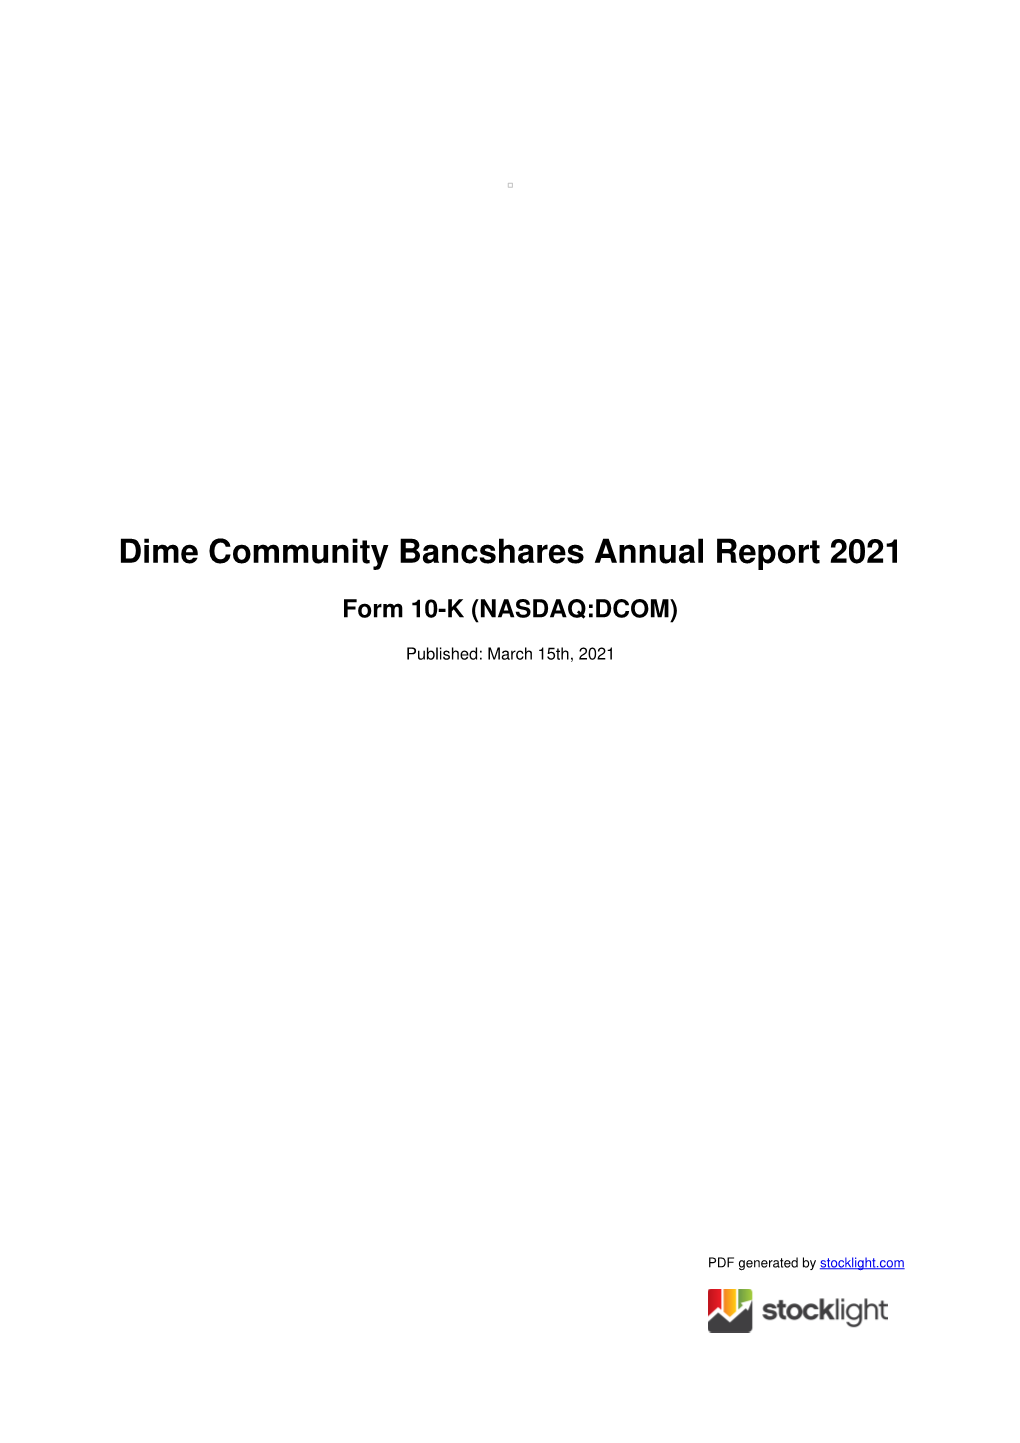 Dime Community Bancshares Annual Report 2021